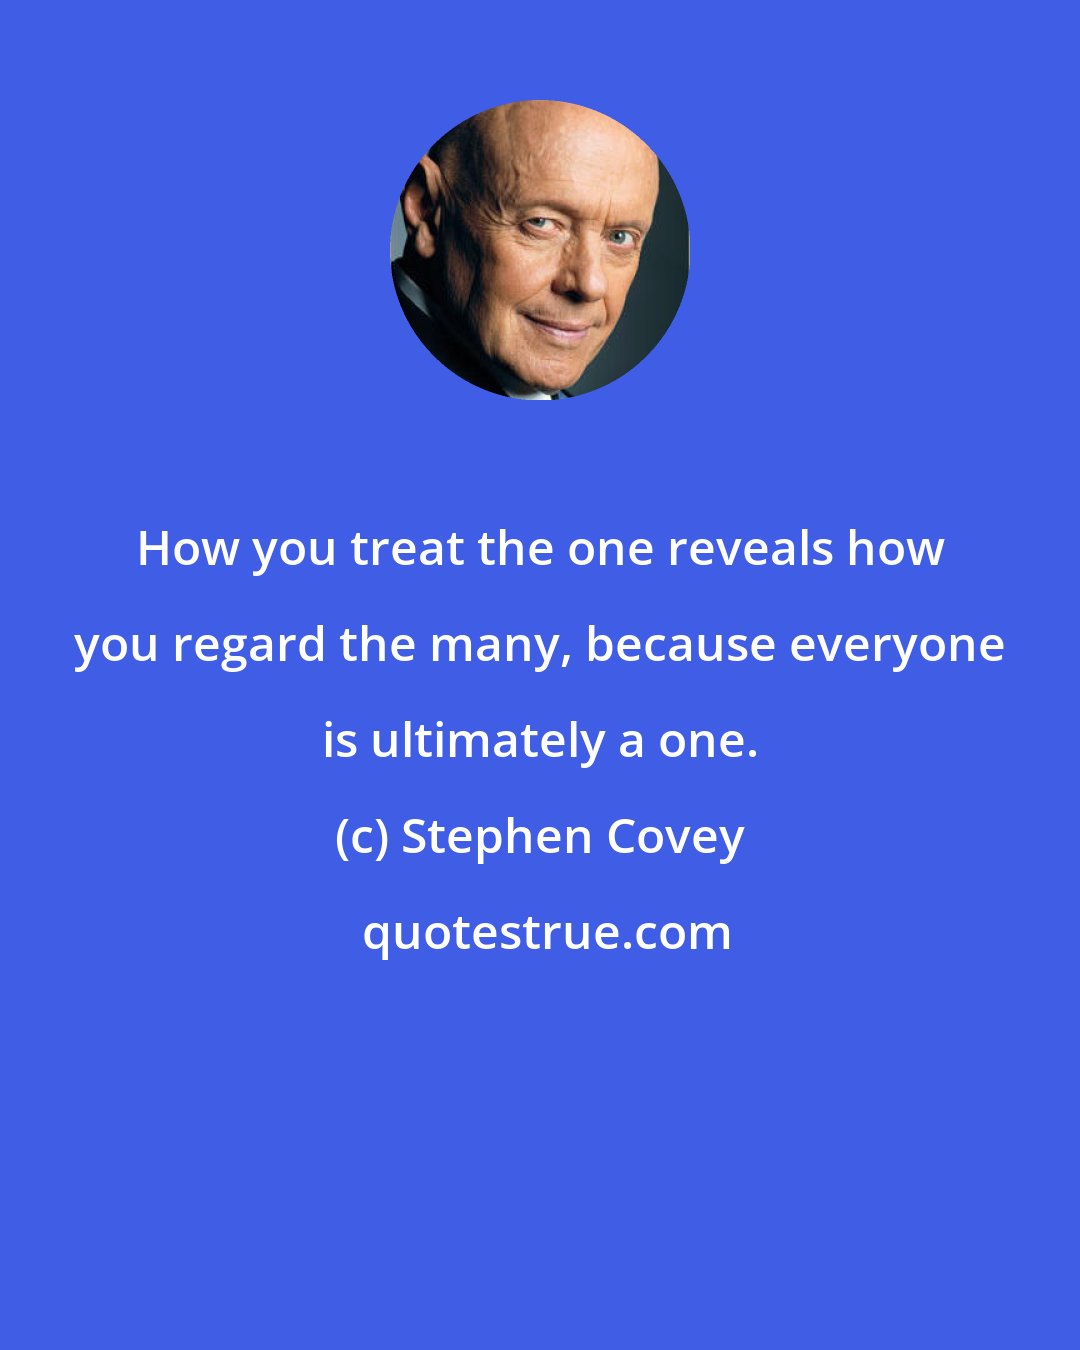 Stephen Covey: How you treat the one reveals how you regard the many, because everyone is ultimately a one.